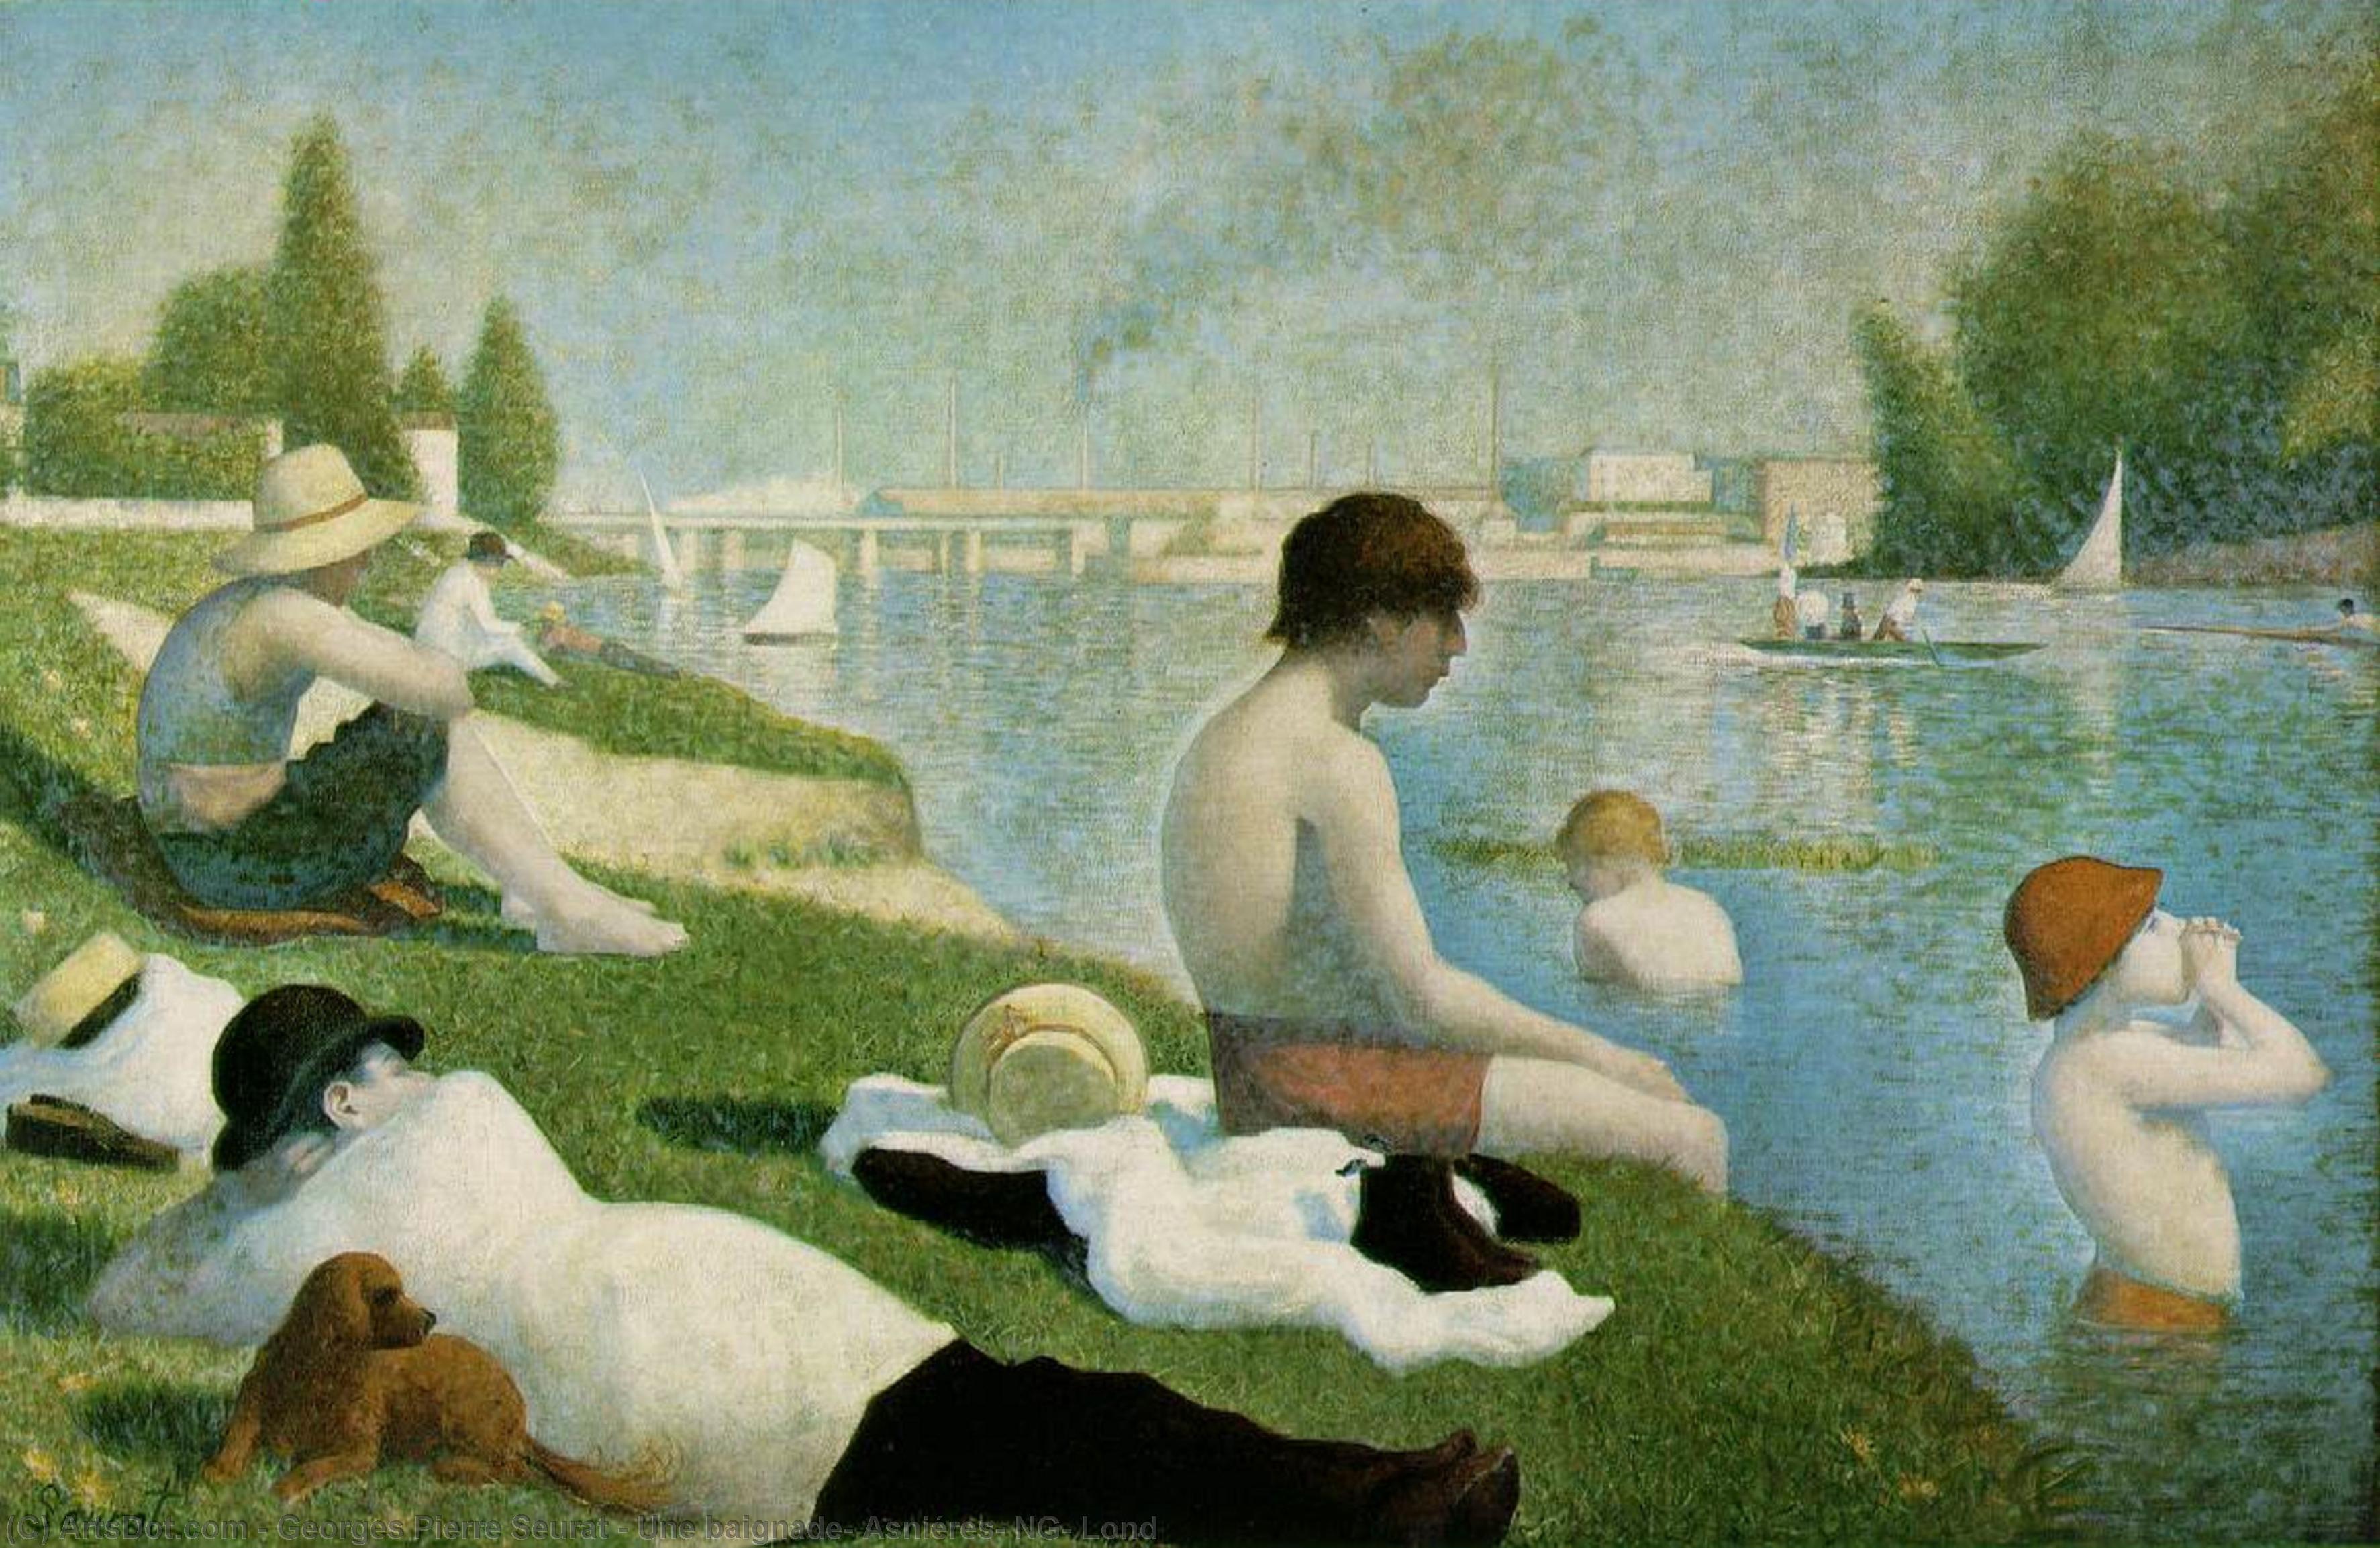 WikiOO.org - 백과 사전 - 회화, 삽화 Georges Pierre Seurat - Une baignade, Asniéres, NG, Lond